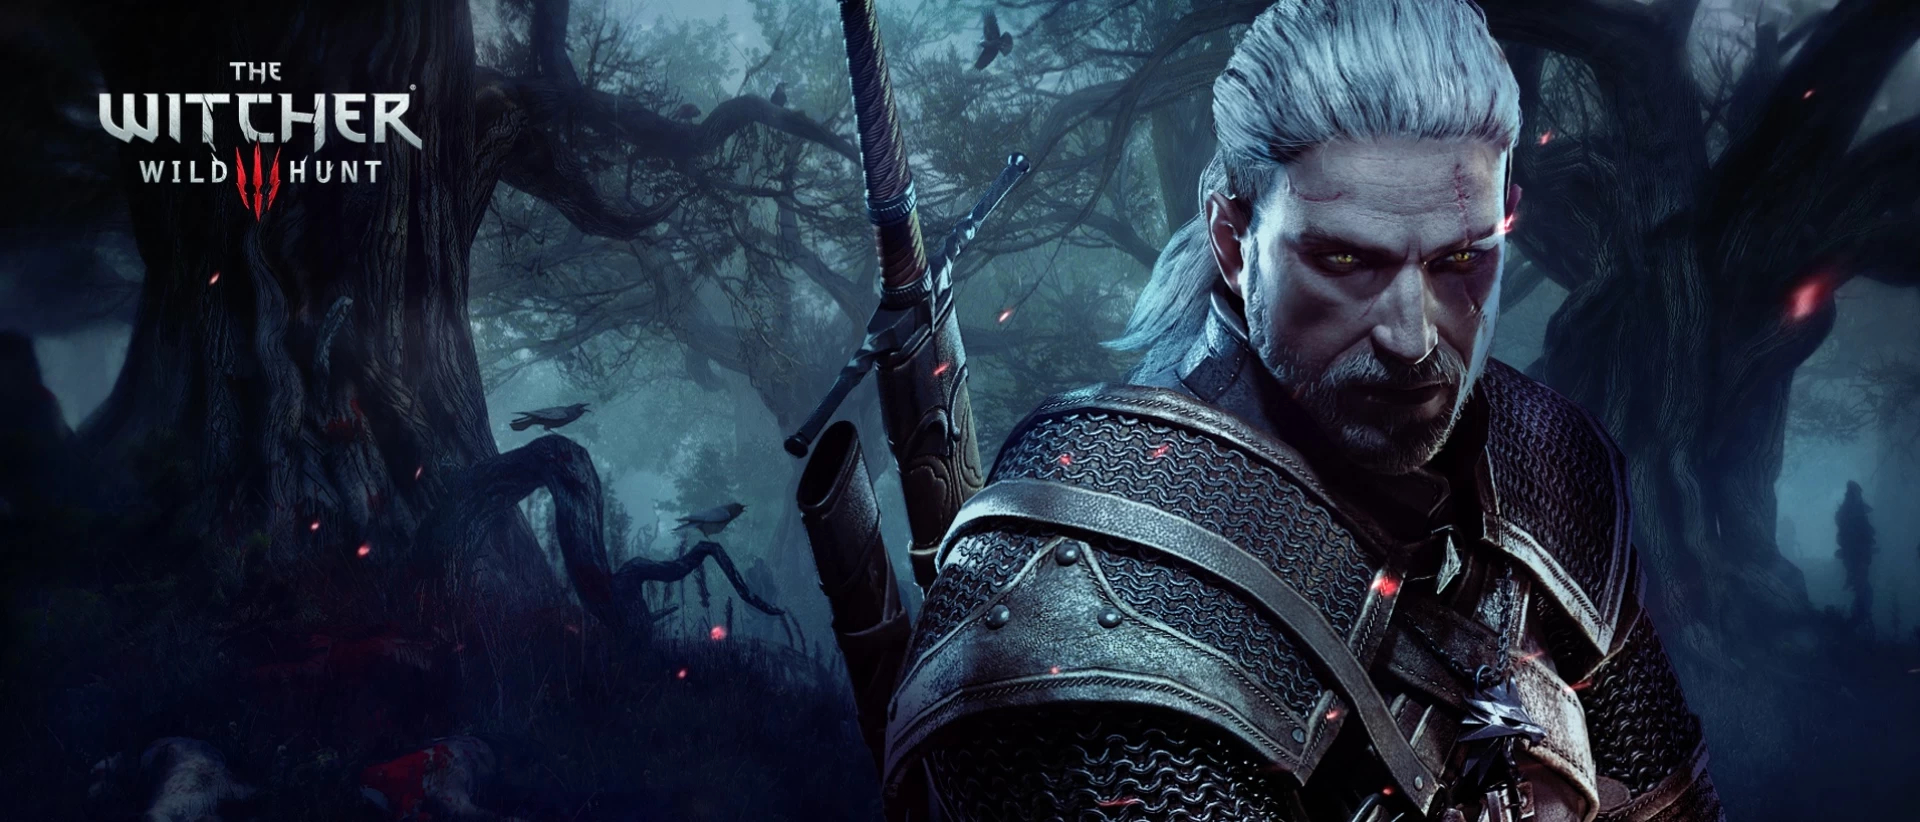 The Best The Witcher Game, According to Critics